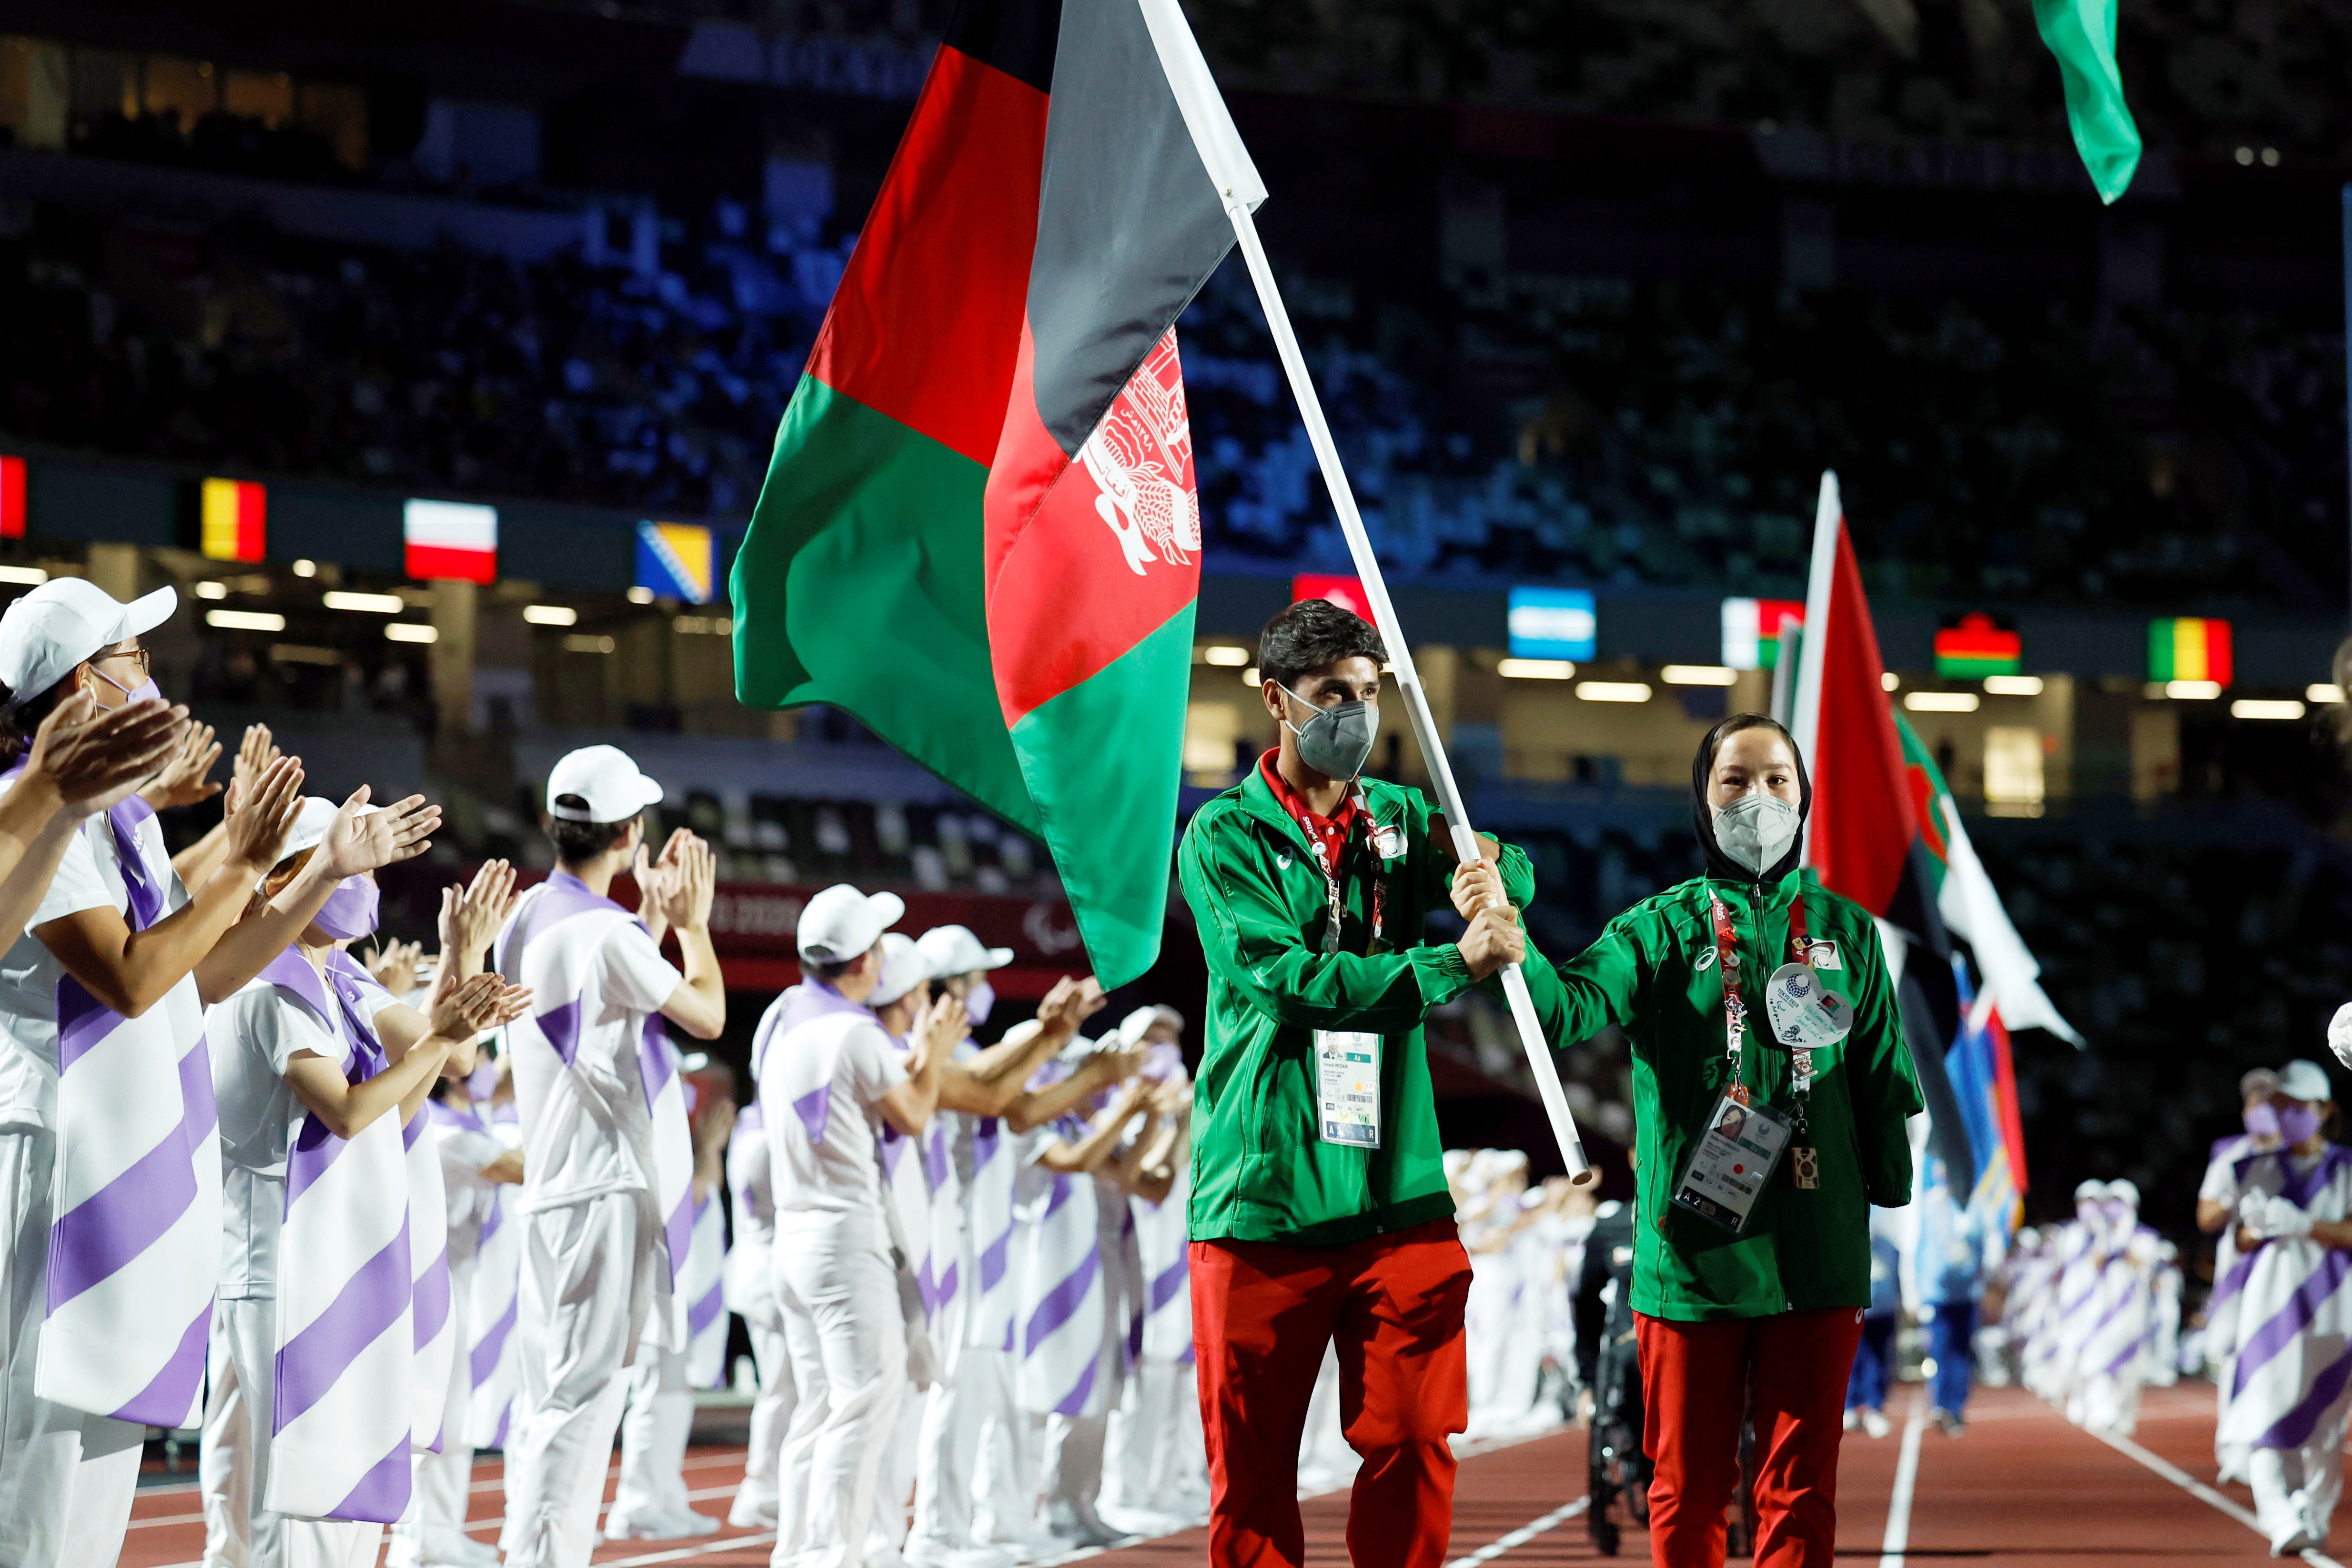 Tokyo 2020 Paralympic Games - The Tokyo 2020 Paralympic Games Closing Ceremony - Olympic Stadium, Tokyo, Japan - September 5, 2021. Hossain Rasouli of Afghanistan and Zakia Khudadadi of Afghanistan carry the flag of Afghanistan during the closing ceremony  REUTERS/Issei Kato     TPX IMAGES OF THE DAY